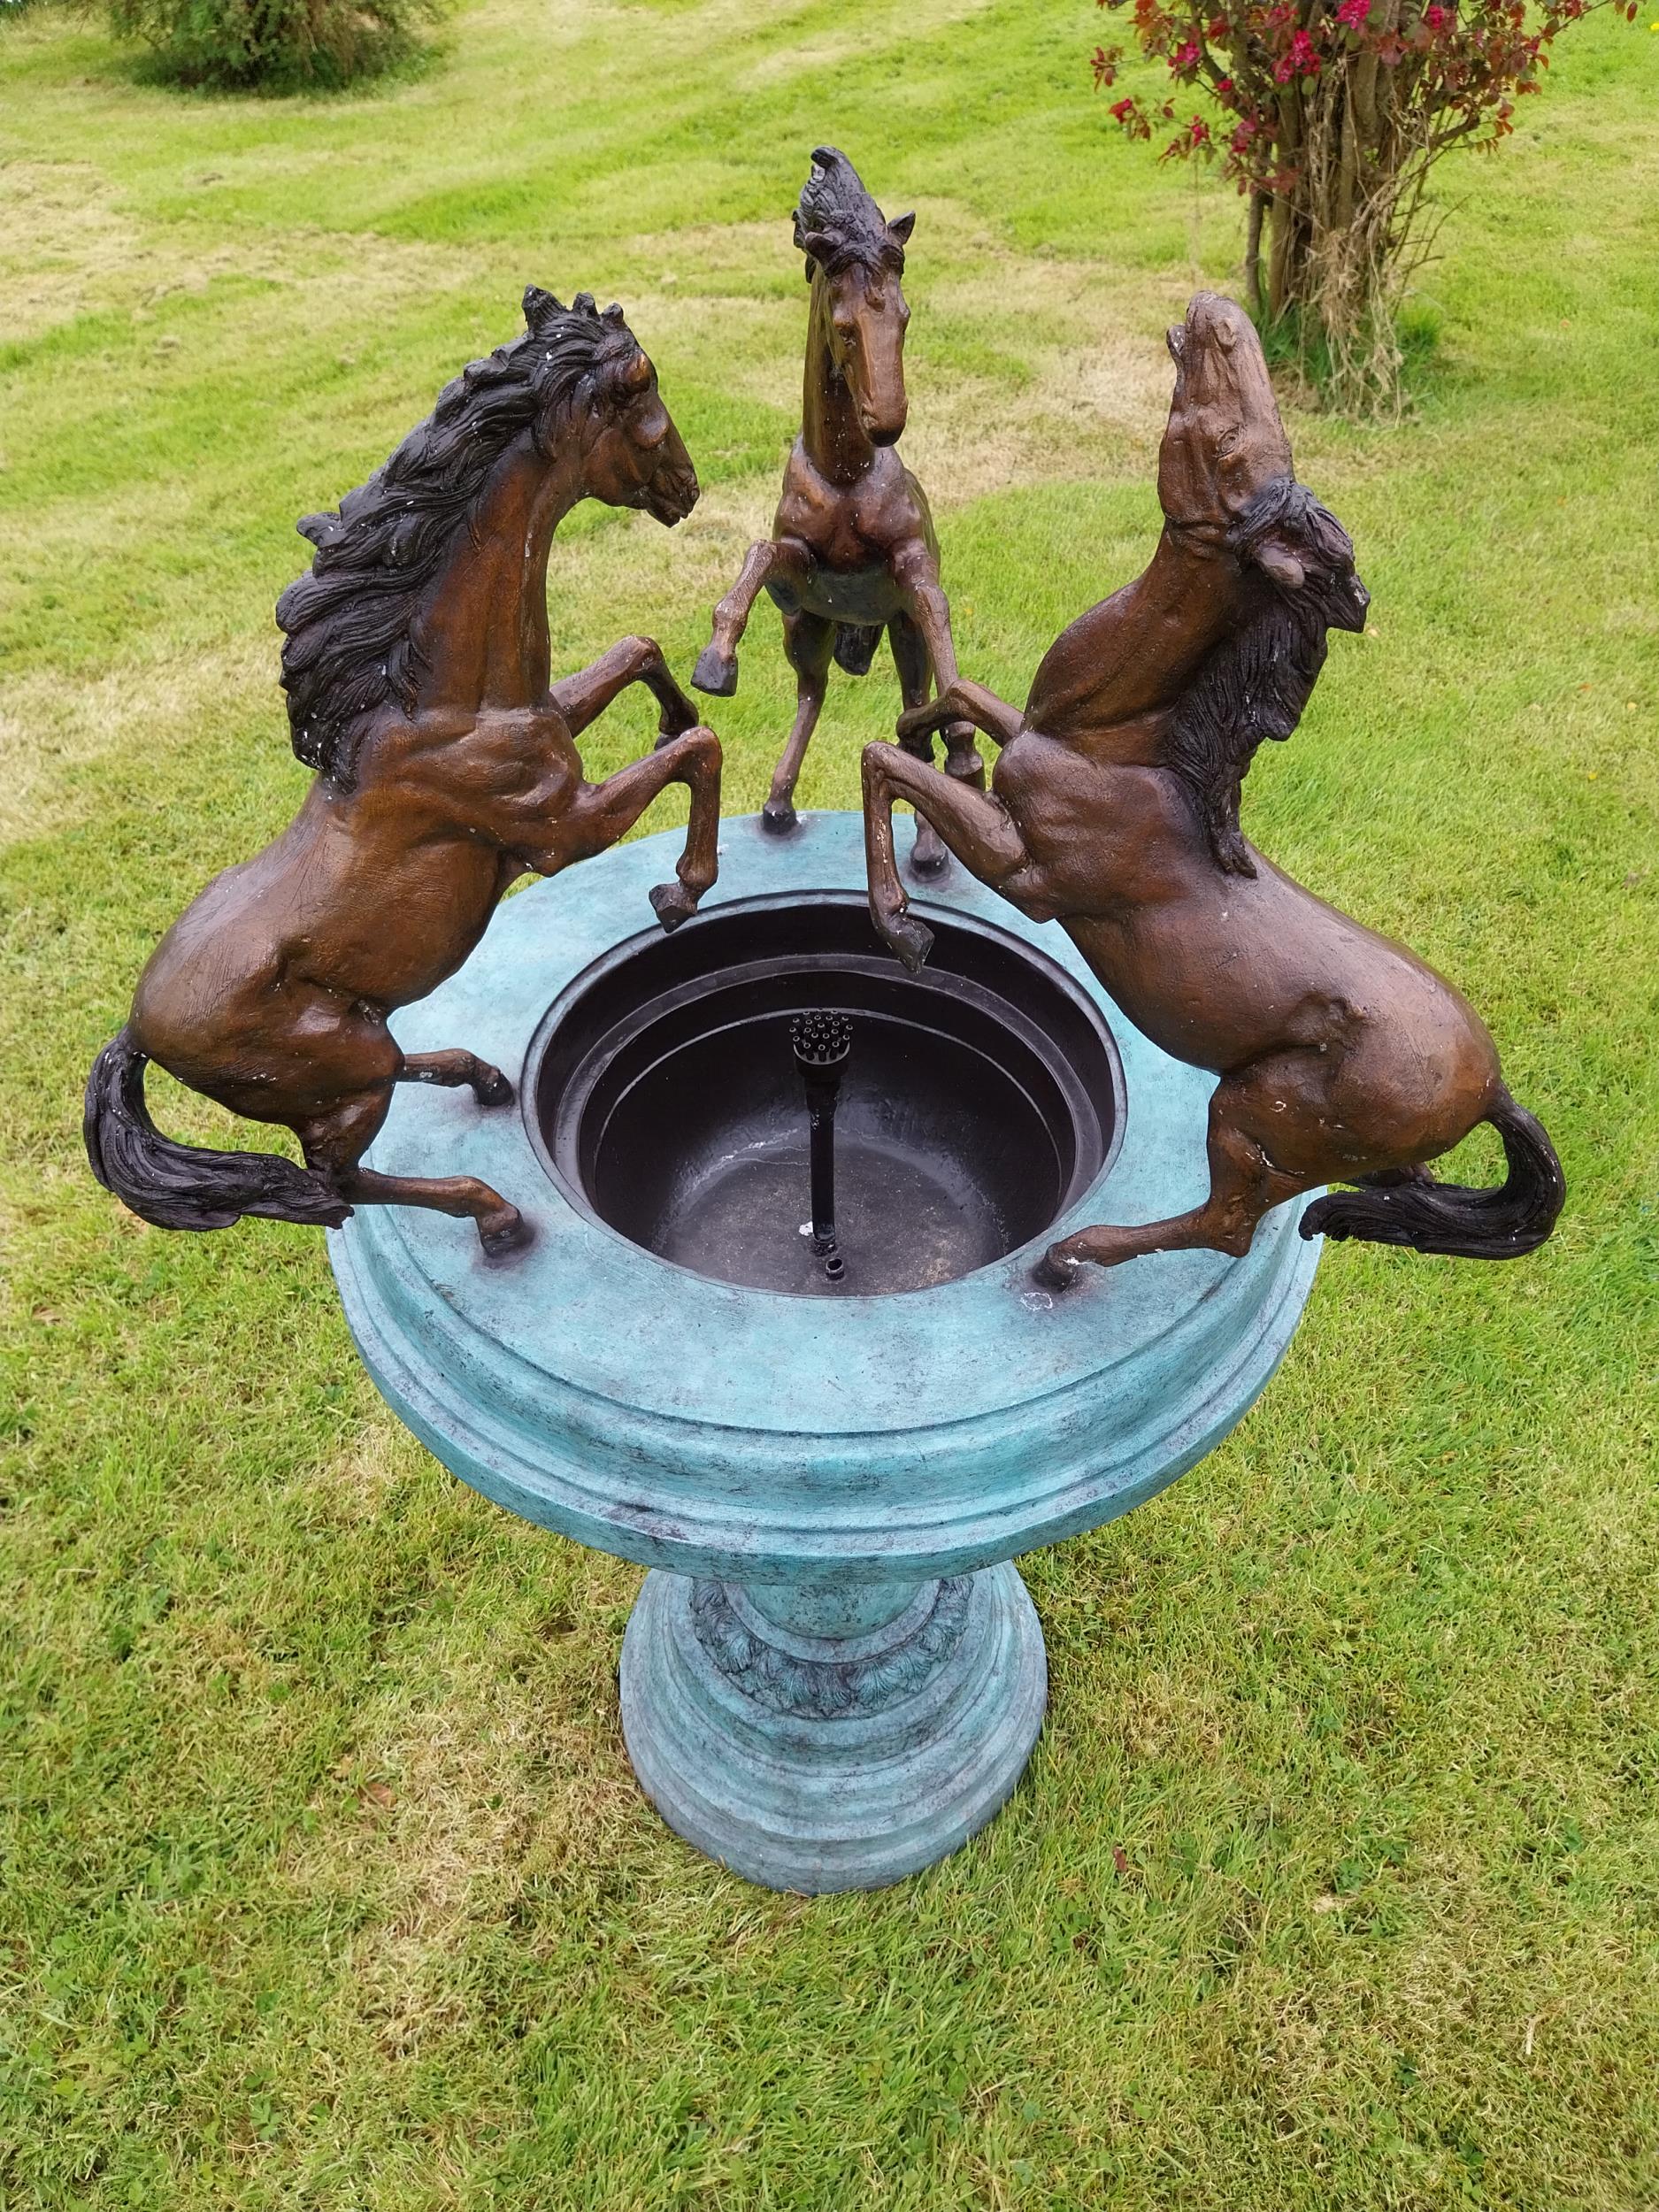 Exceptional quality water feature surmounted by prancing Horses {130 cm H x 80 cm Dia.}. - Image 3 of 6